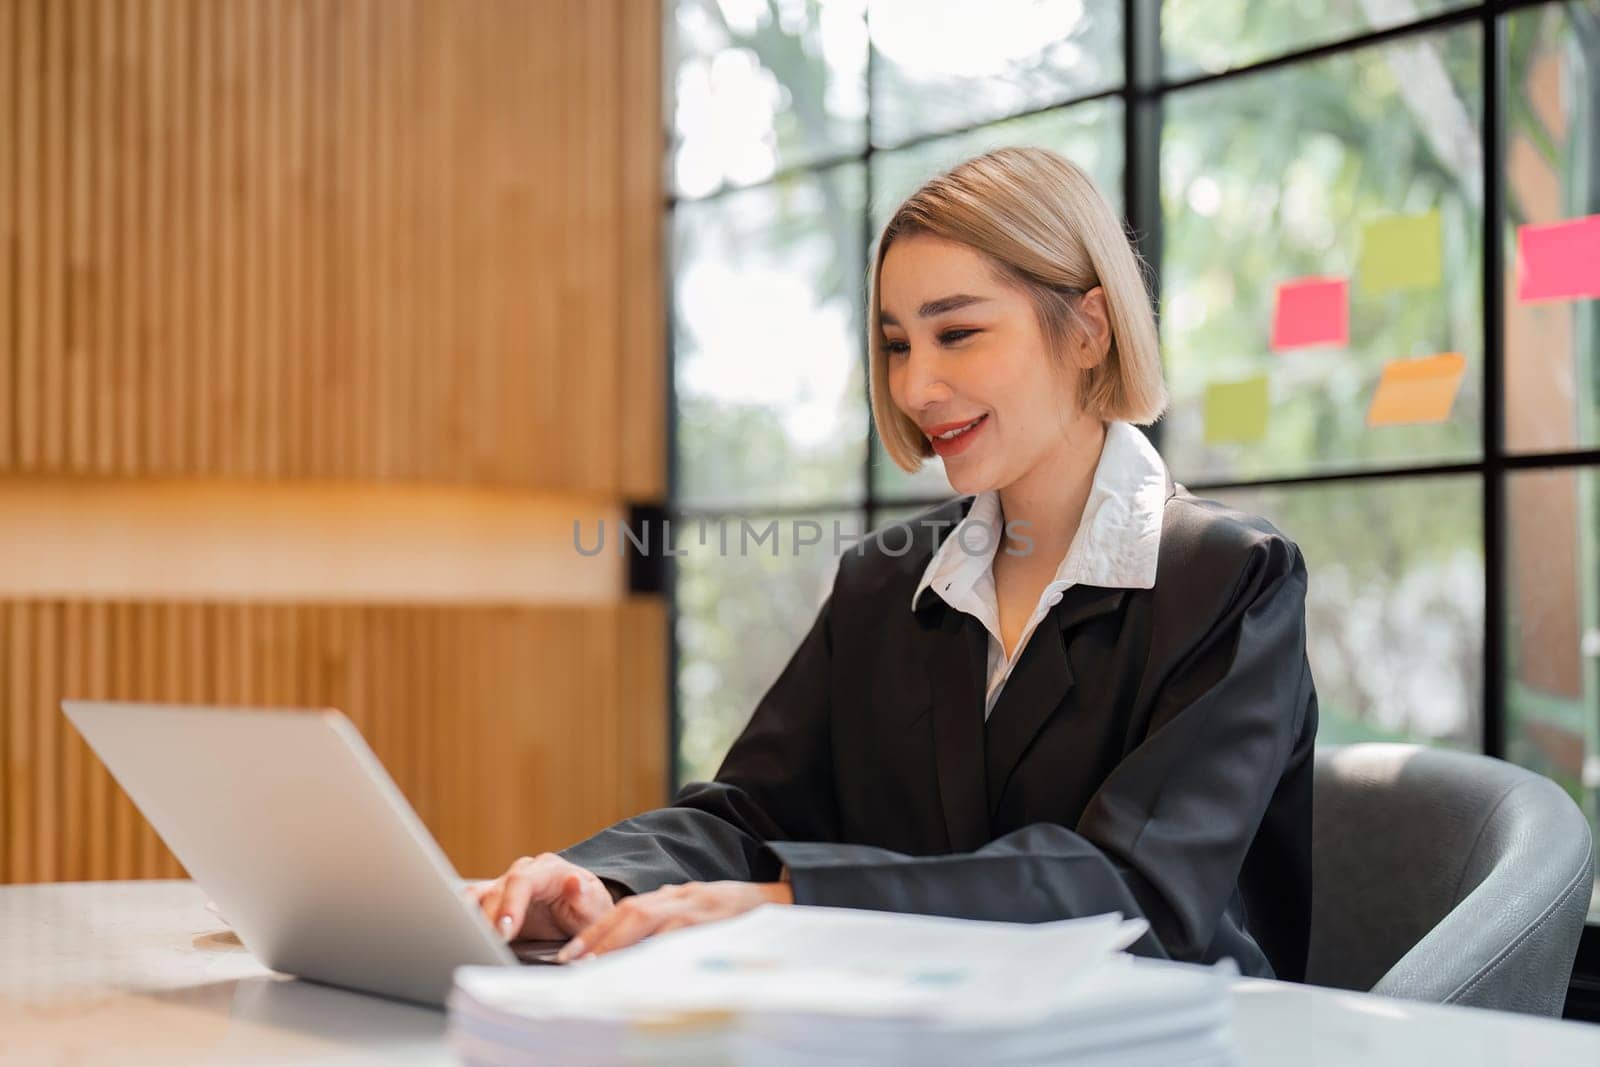 Portrait of young business woman using laptop and documents on the table at office.